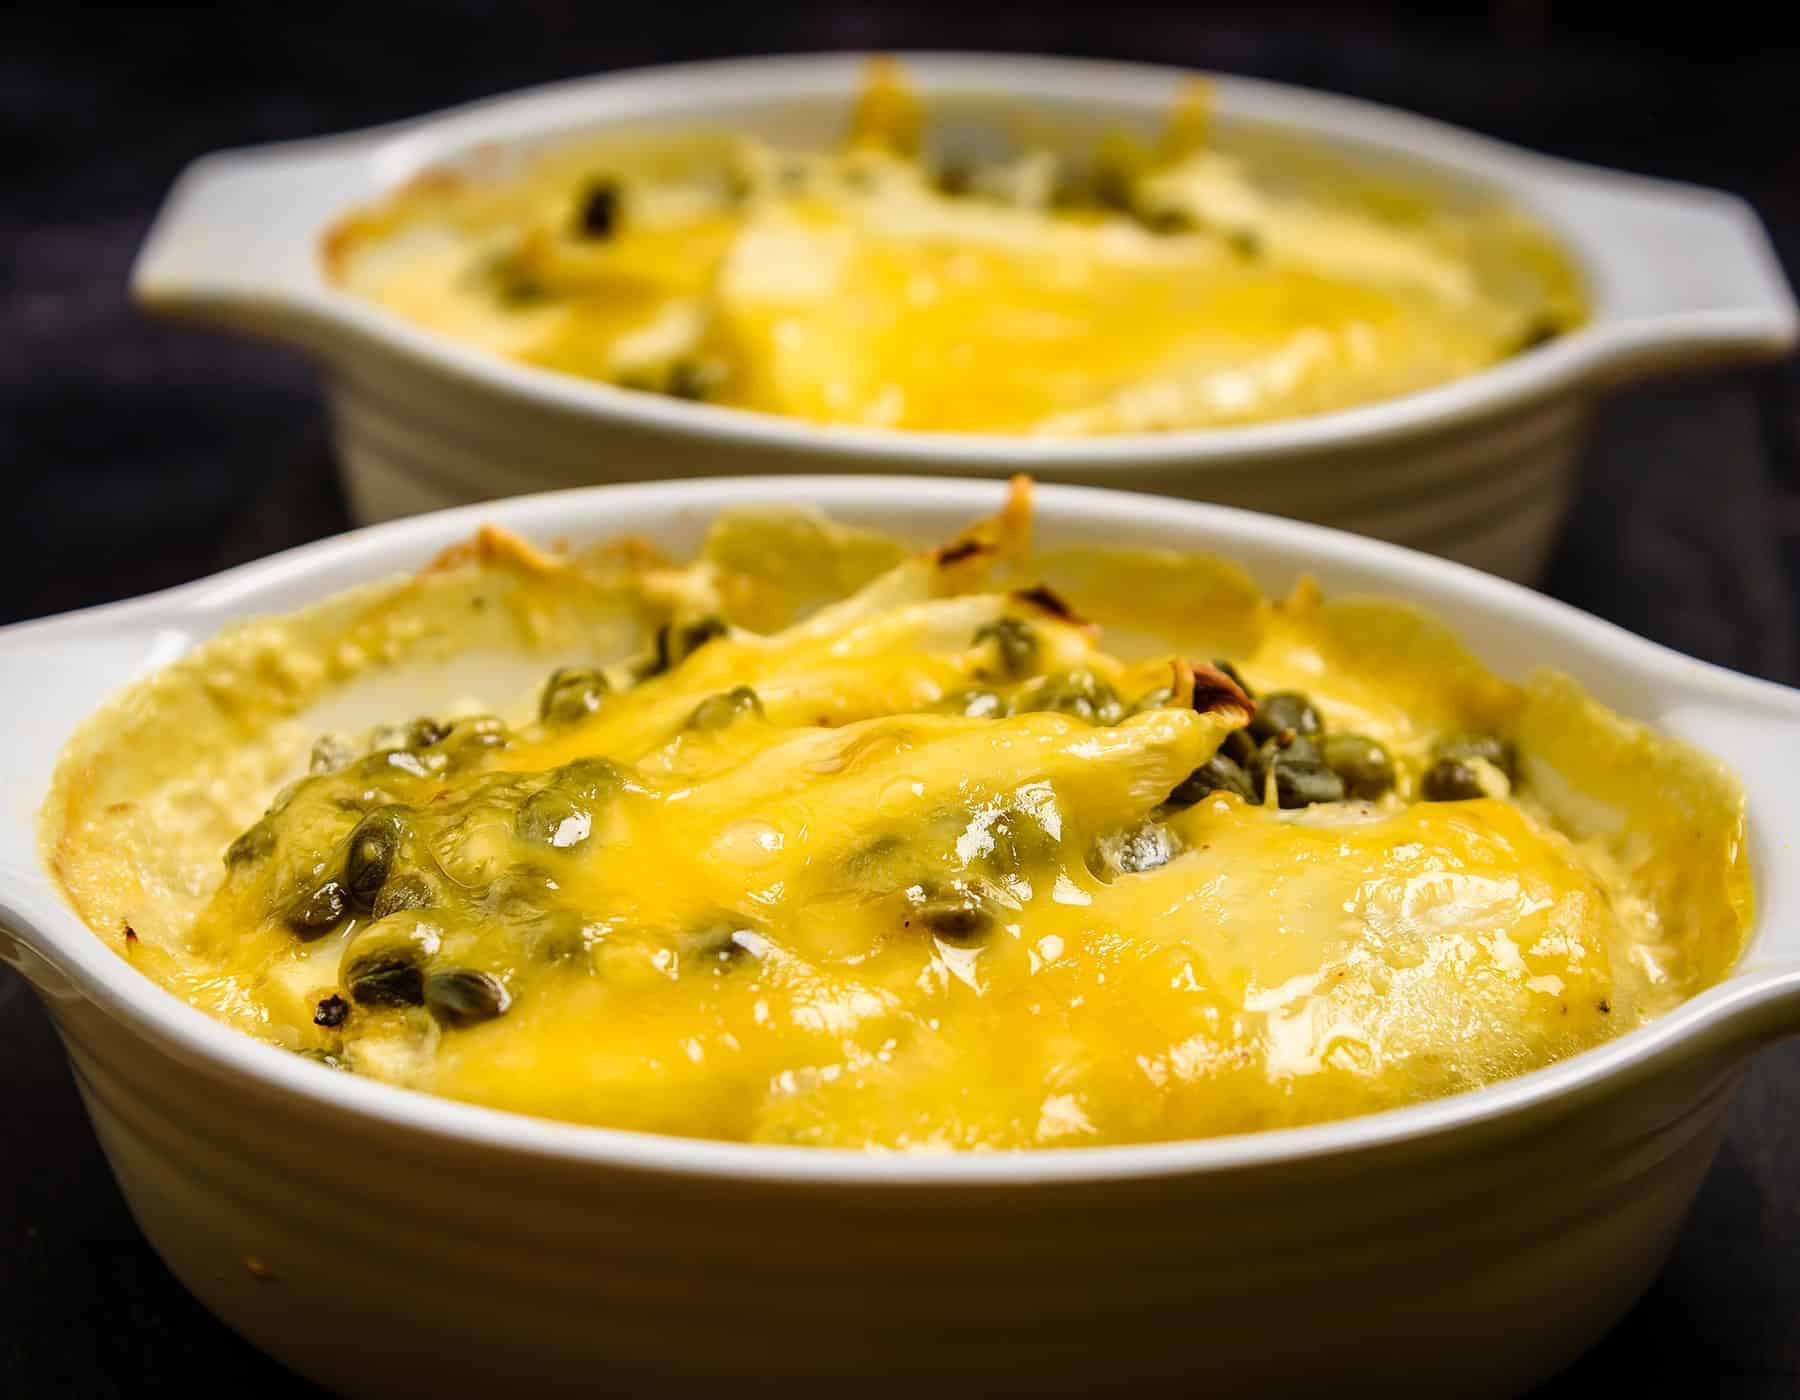 Vegan Fennel & Caper Bake with melted cheese